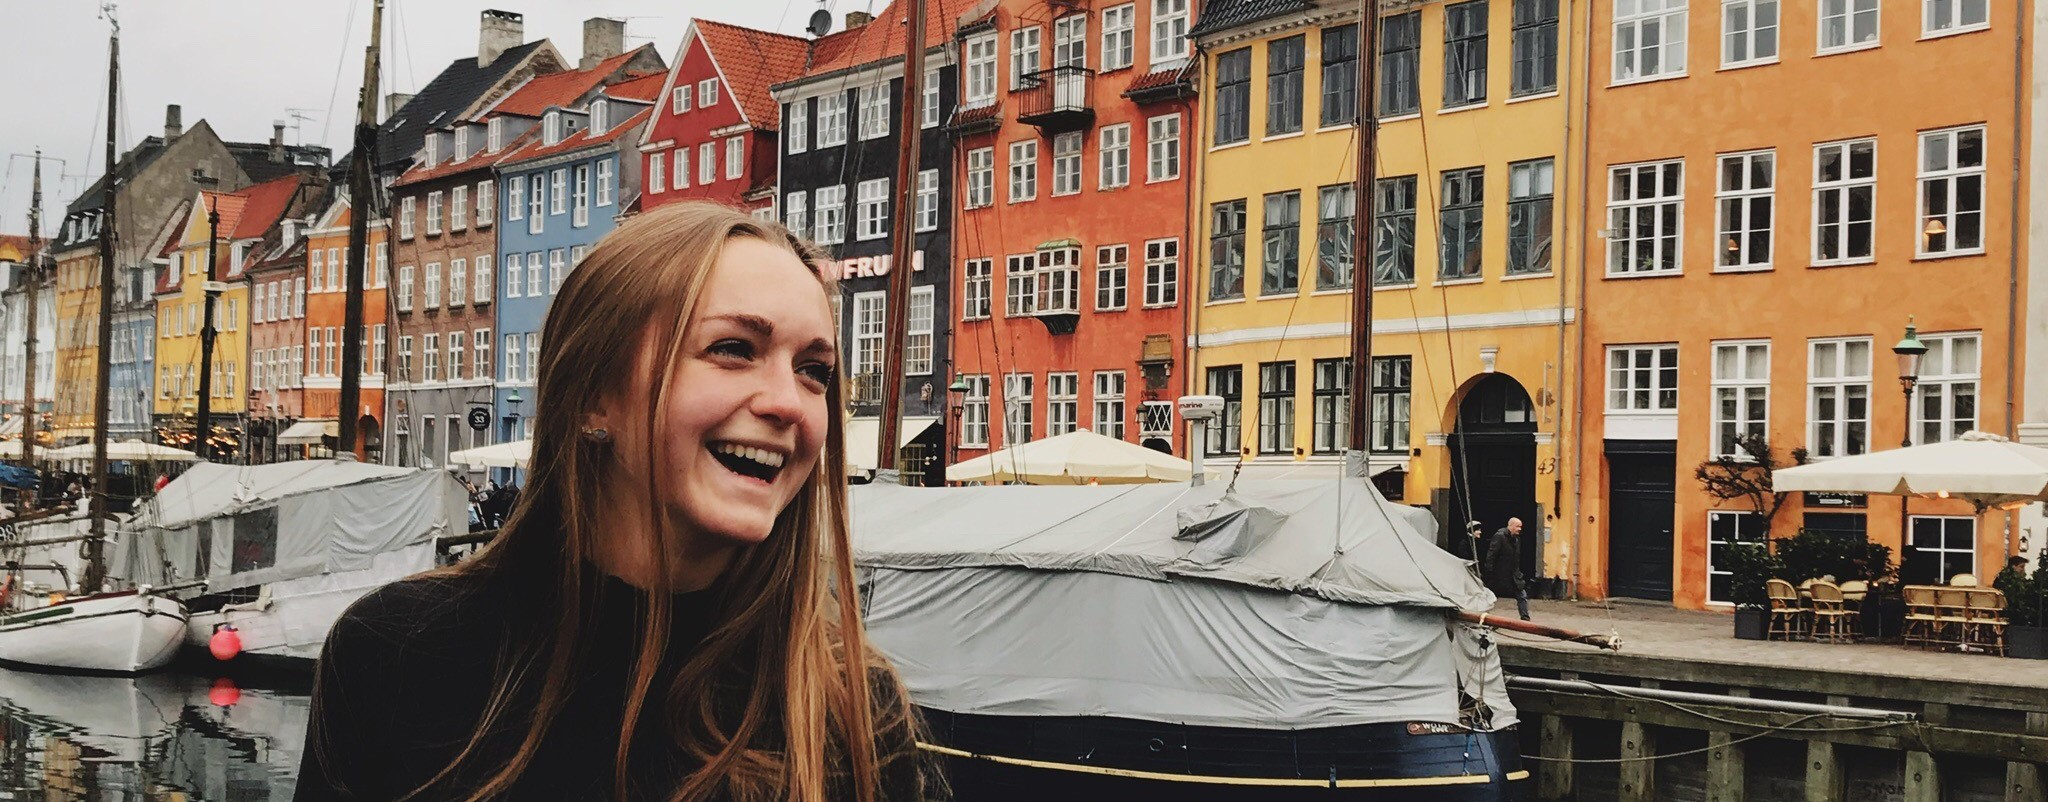 Student on colorful canal in Copenhagen